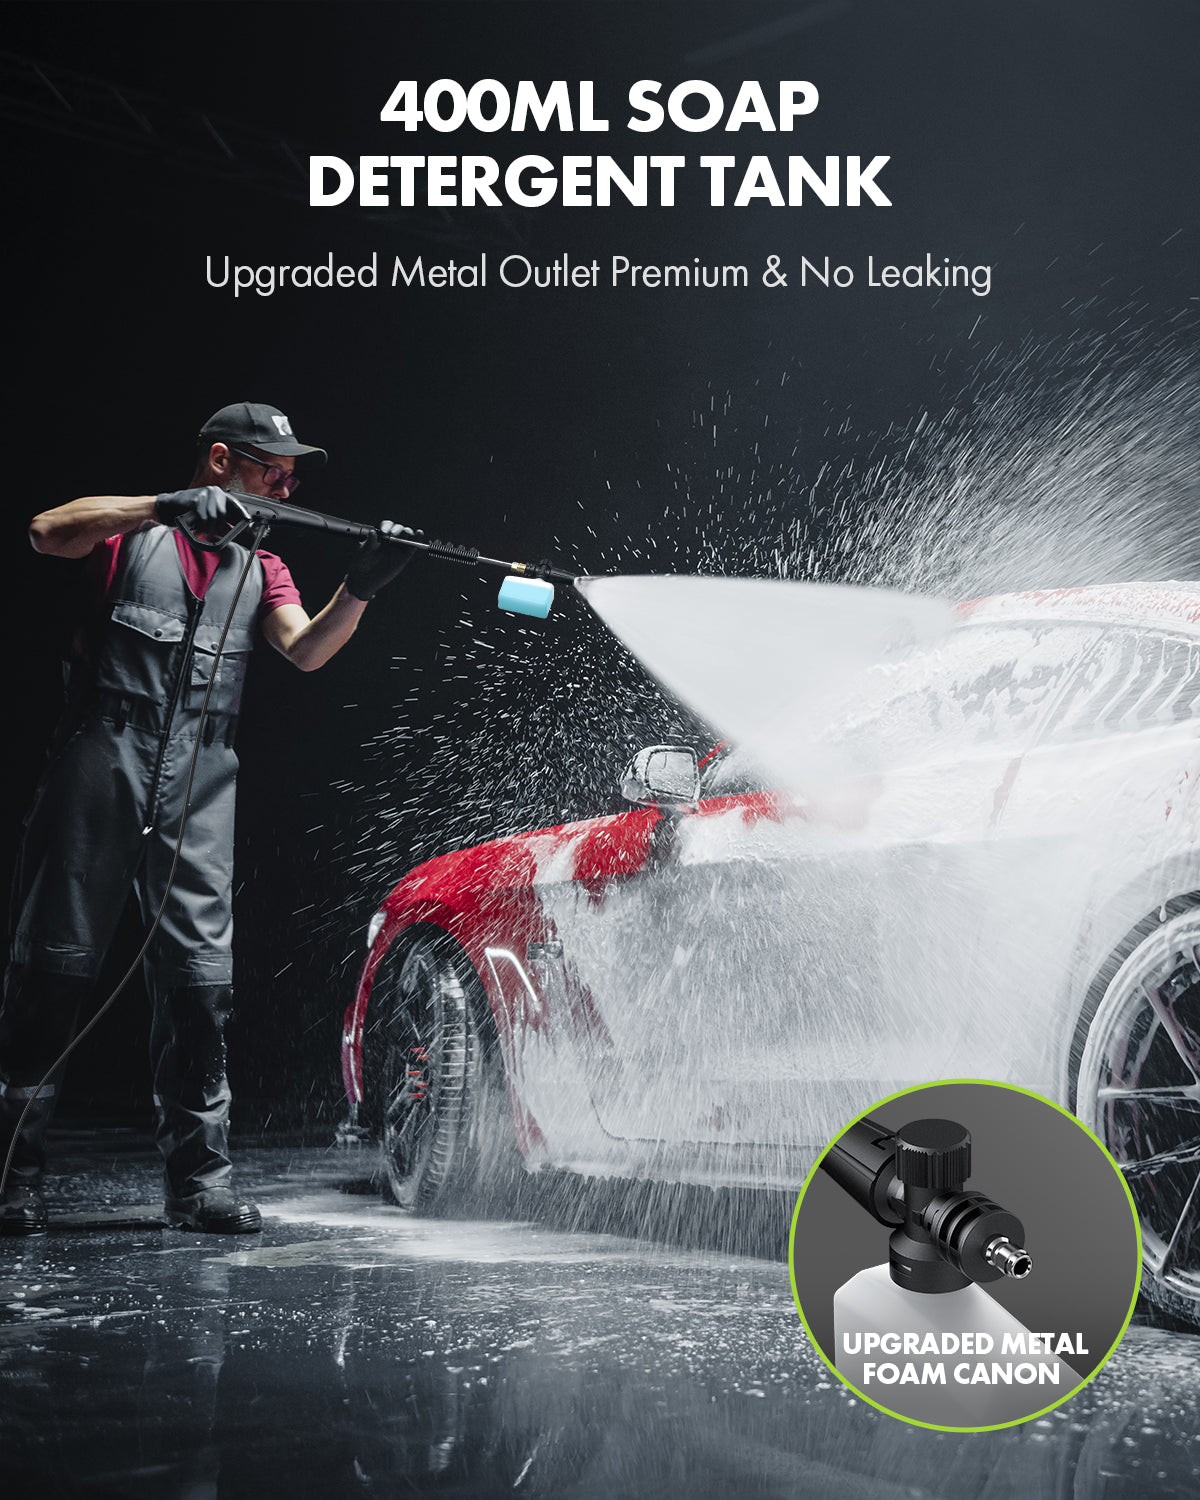 Electric Pressure Washer Power Washers - Anykit 1600 PSI Power Washers Electric Powered Max 1.2 GPM With 4 Quick Connected Nozzles,Water Pressure Washer for Cleaning Car Patio deck Outdoors